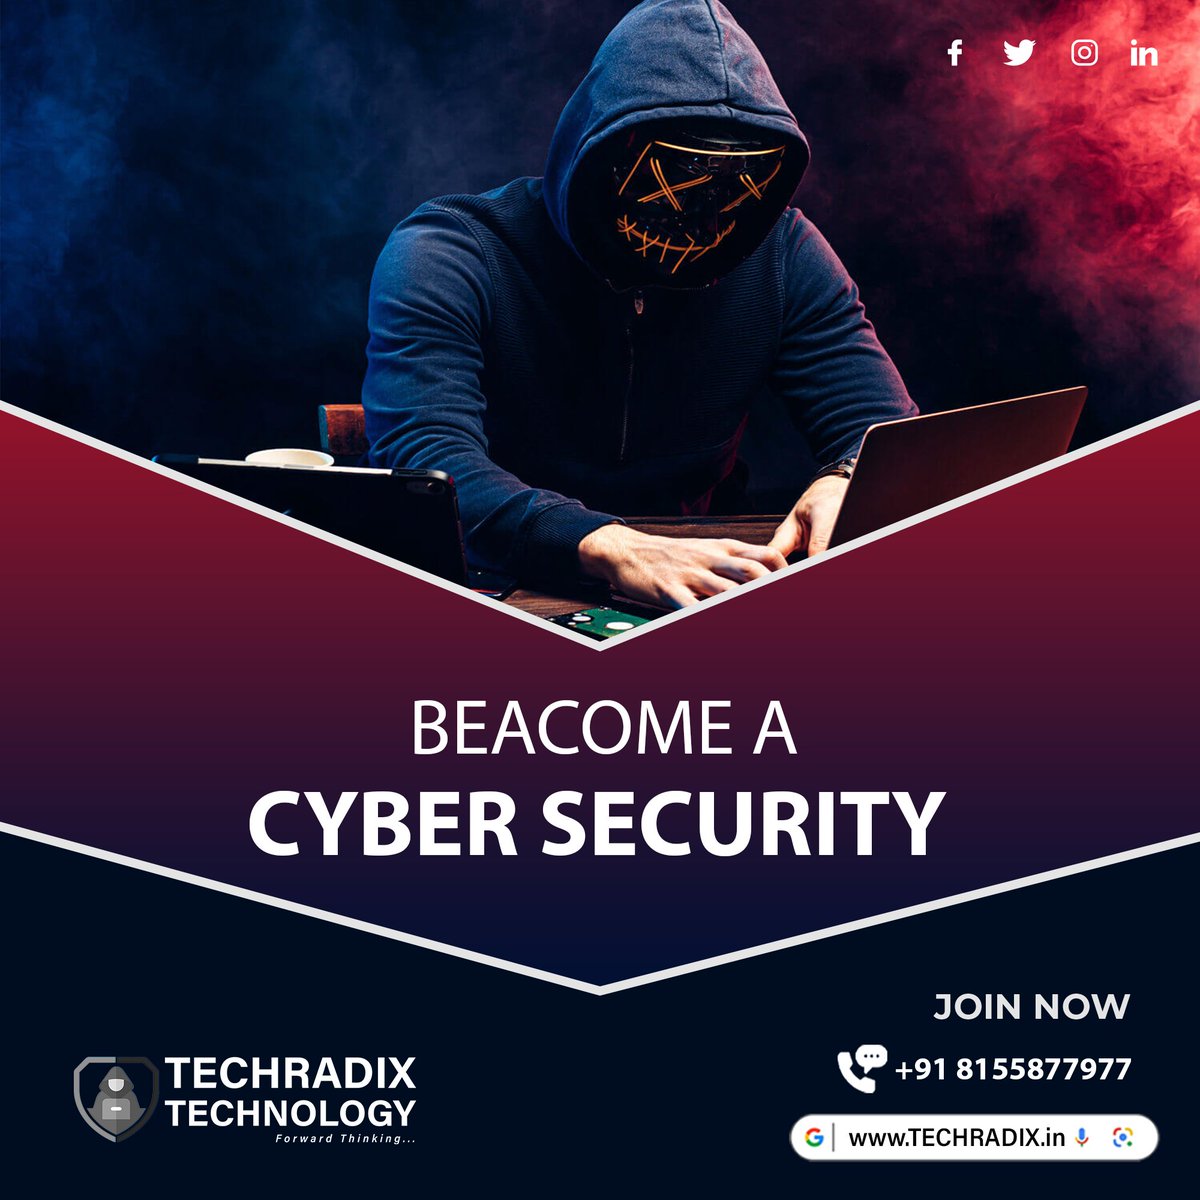 Techradix Technology provides comprehensive Cyber Security training in Surat, covering a wide range of topics including network security, cloud security, web security, and much more. techradix.in #cybersecurity #surat #techradix #techradixtechnology #Cyber Surat